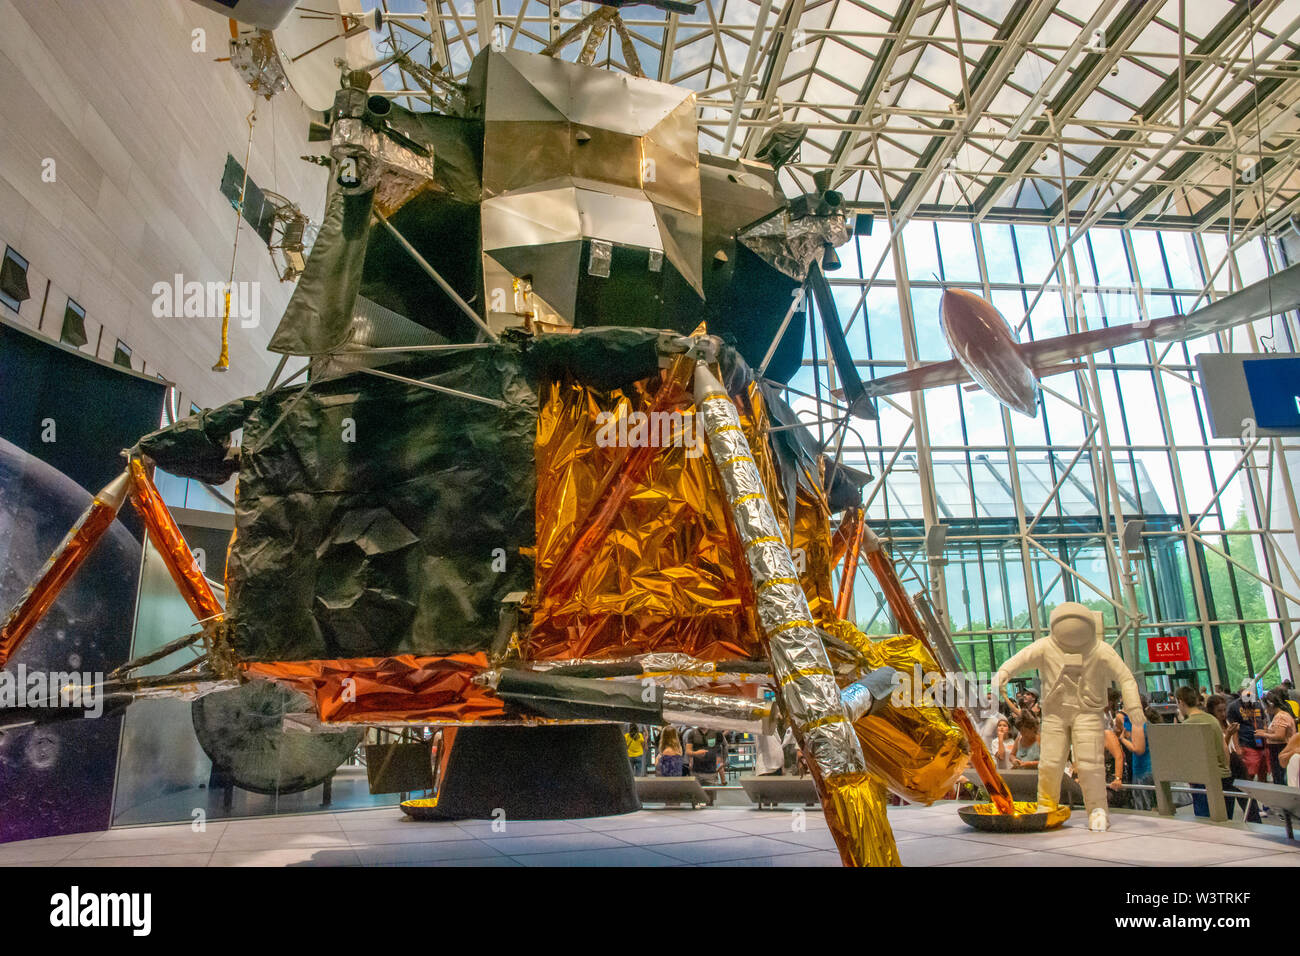 A Lunar Module (LM) like this one took Astronauts Neil Armstrong and Buz Aldrin to the surface of the Moon on July 20 1969.  The Smithsonian's LM is i Stock Photo